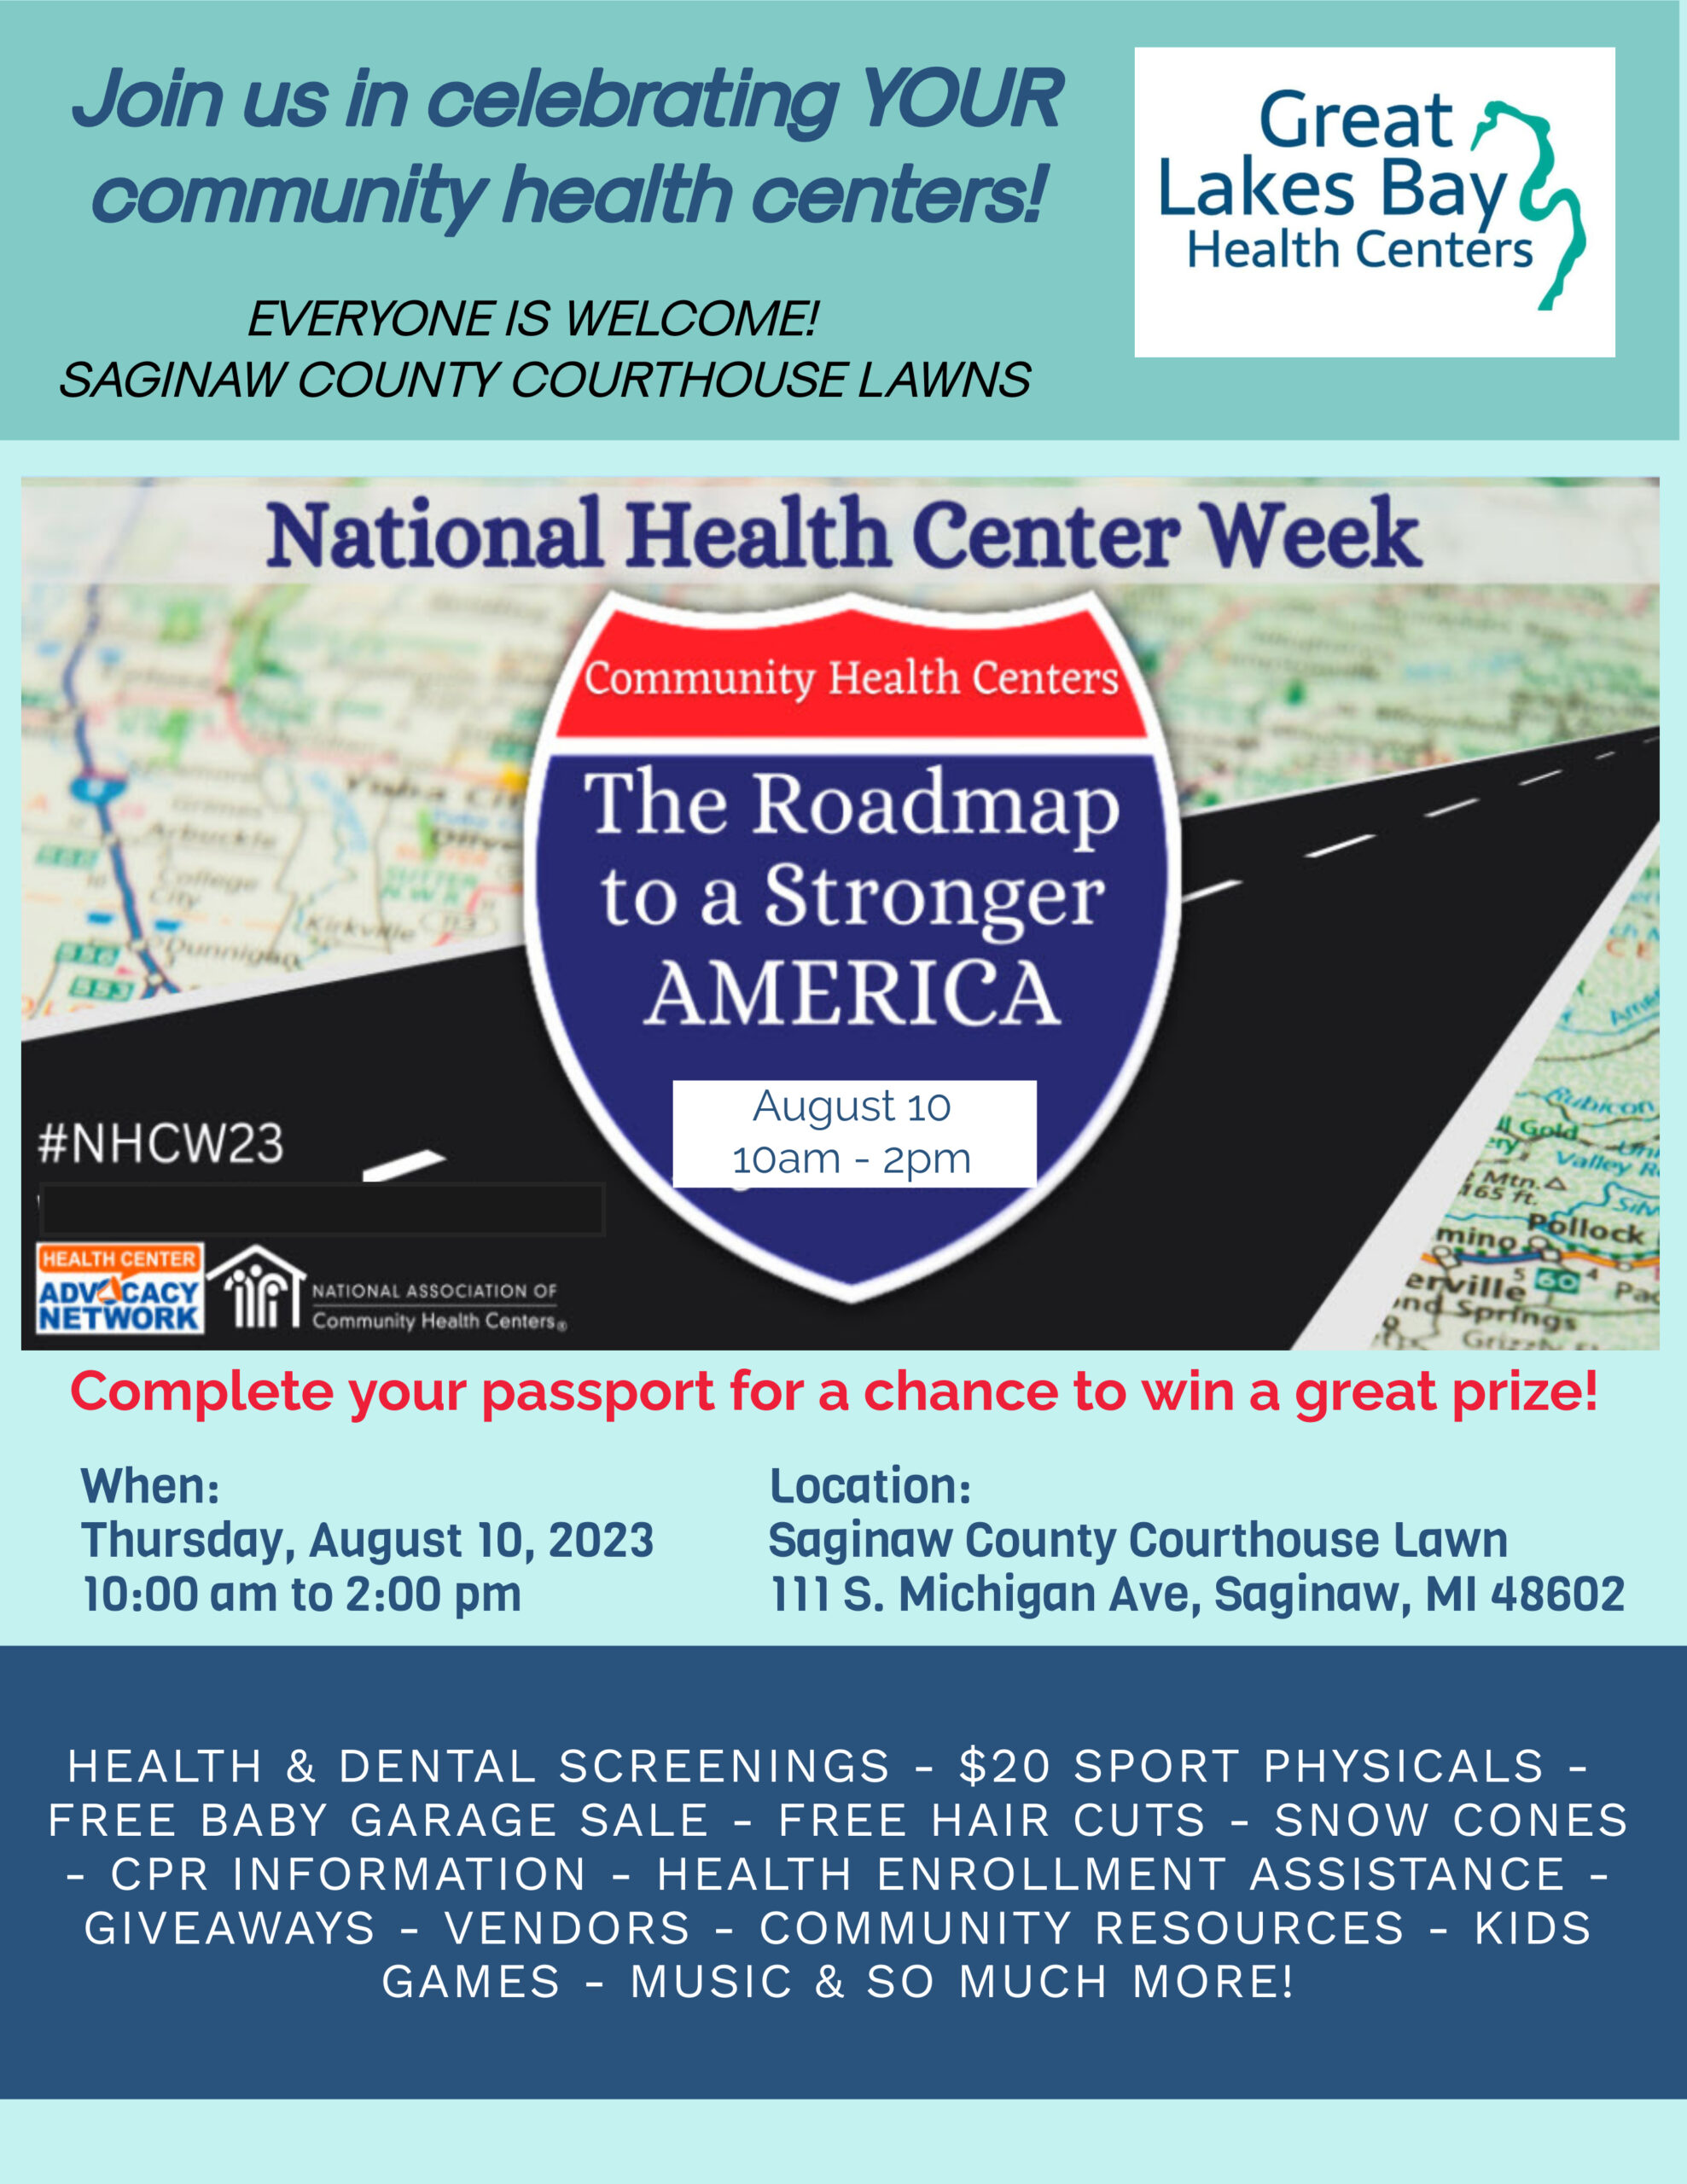 <h1 class="tribe-events-single-event-title">National Health Center Week- The Roadmap To A Stronger AMERICA</h1>